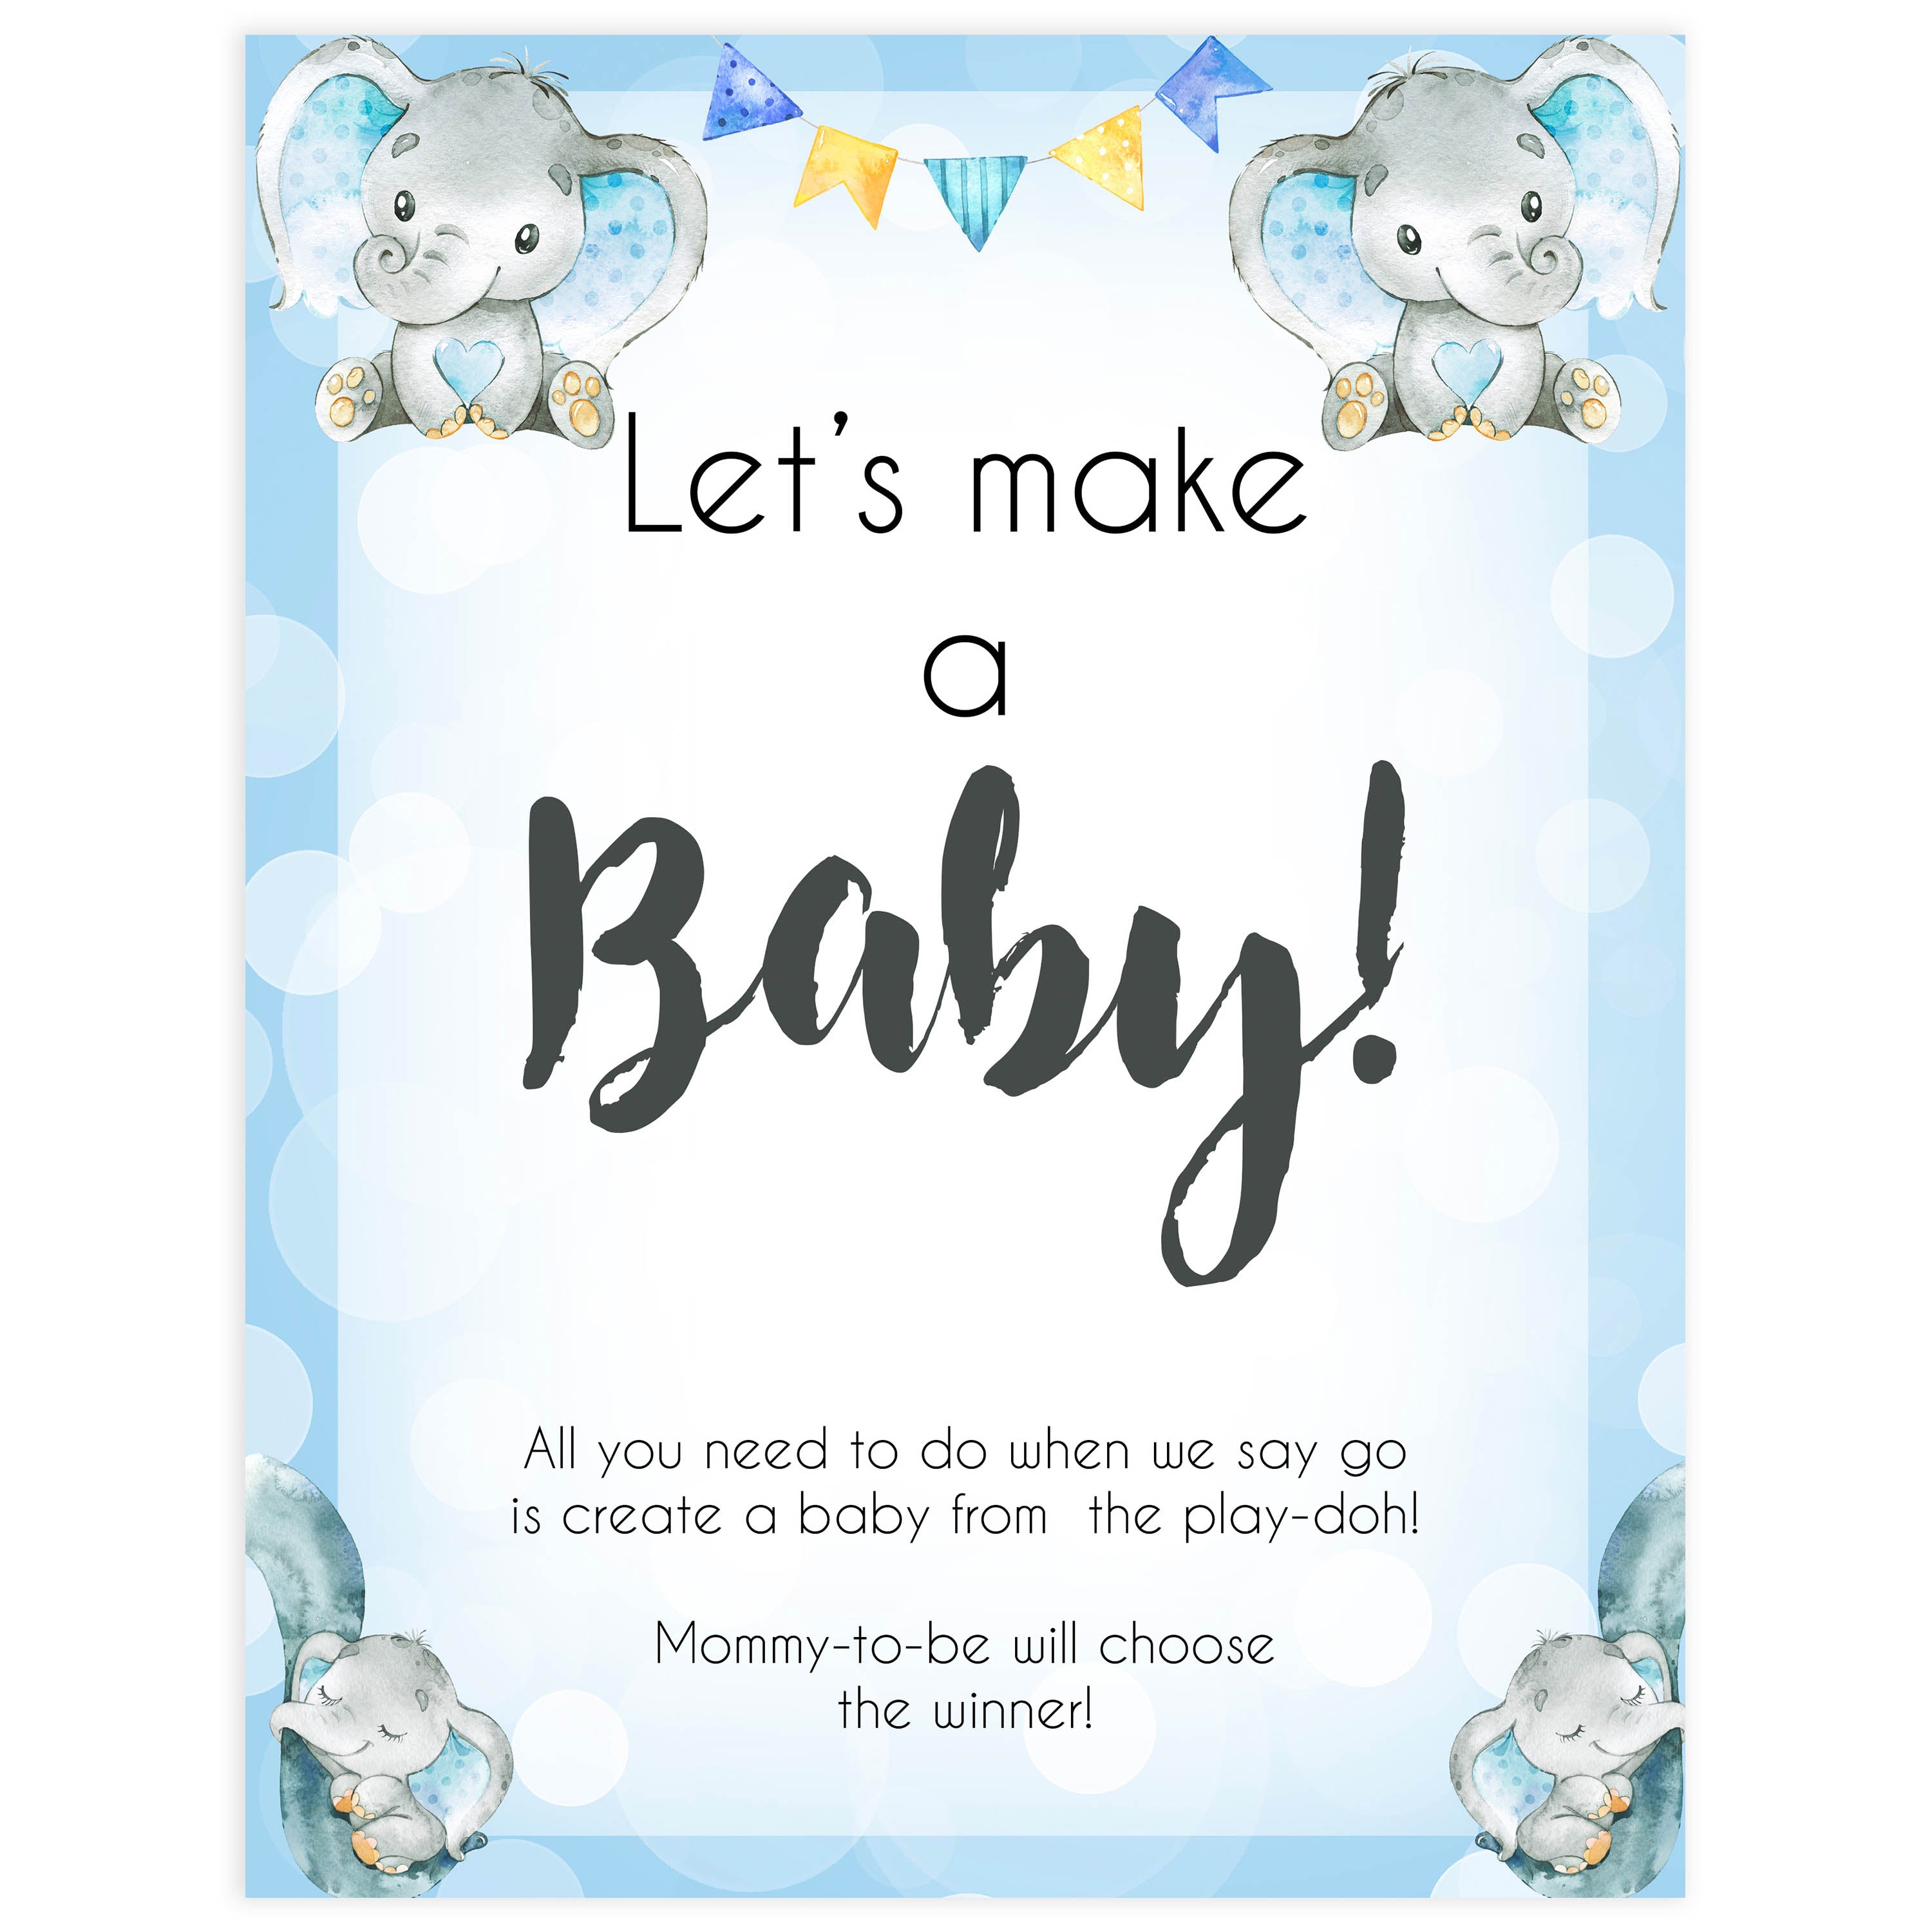 lets make a baby, baby play-doh game, Printable baby shower games, fun baby games, baby shower games, fun baby shower ideas, top baby shower ideas, blue elephant baby shower, blue baby shower ideas